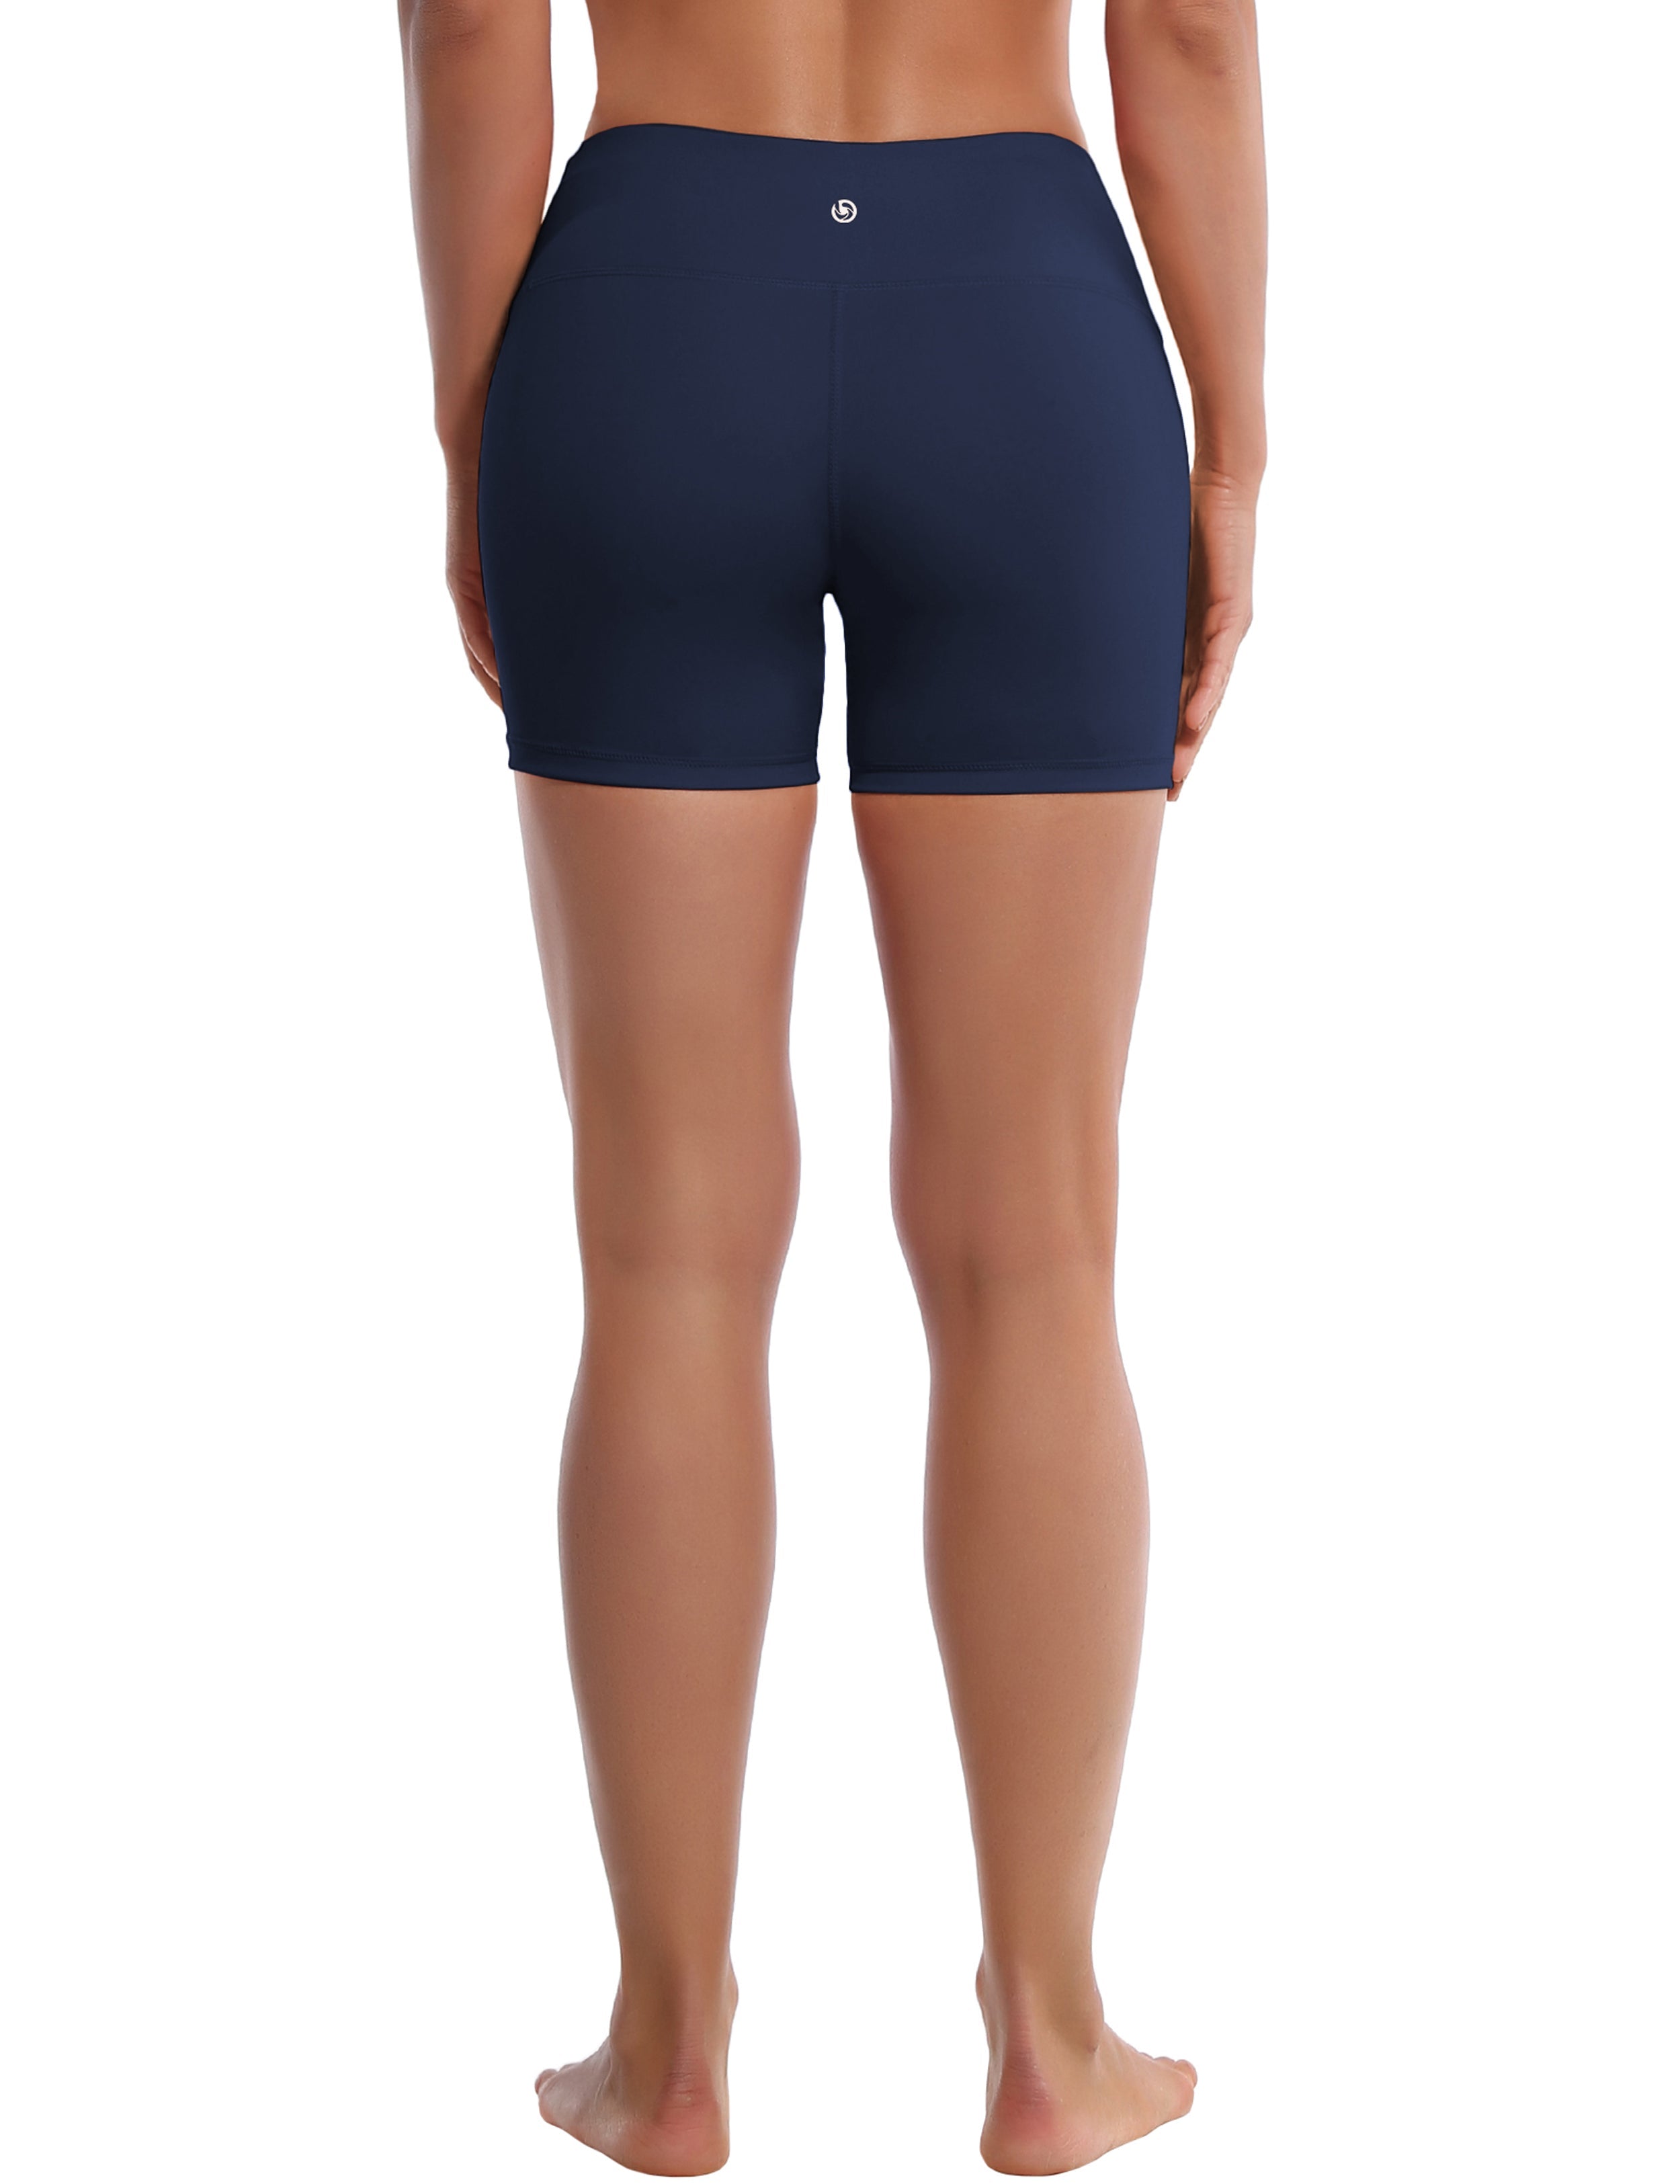 4" Biking Shorts darknavy Sleek, soft, smooth and totally comfortable: our newest style is here. Softest-ever fabric High elasticity High density 4-way stretch Fabric doesn't attract lint easily No see-through Moisture-wicking Machine wash 75% Nylon, 25% Spandex